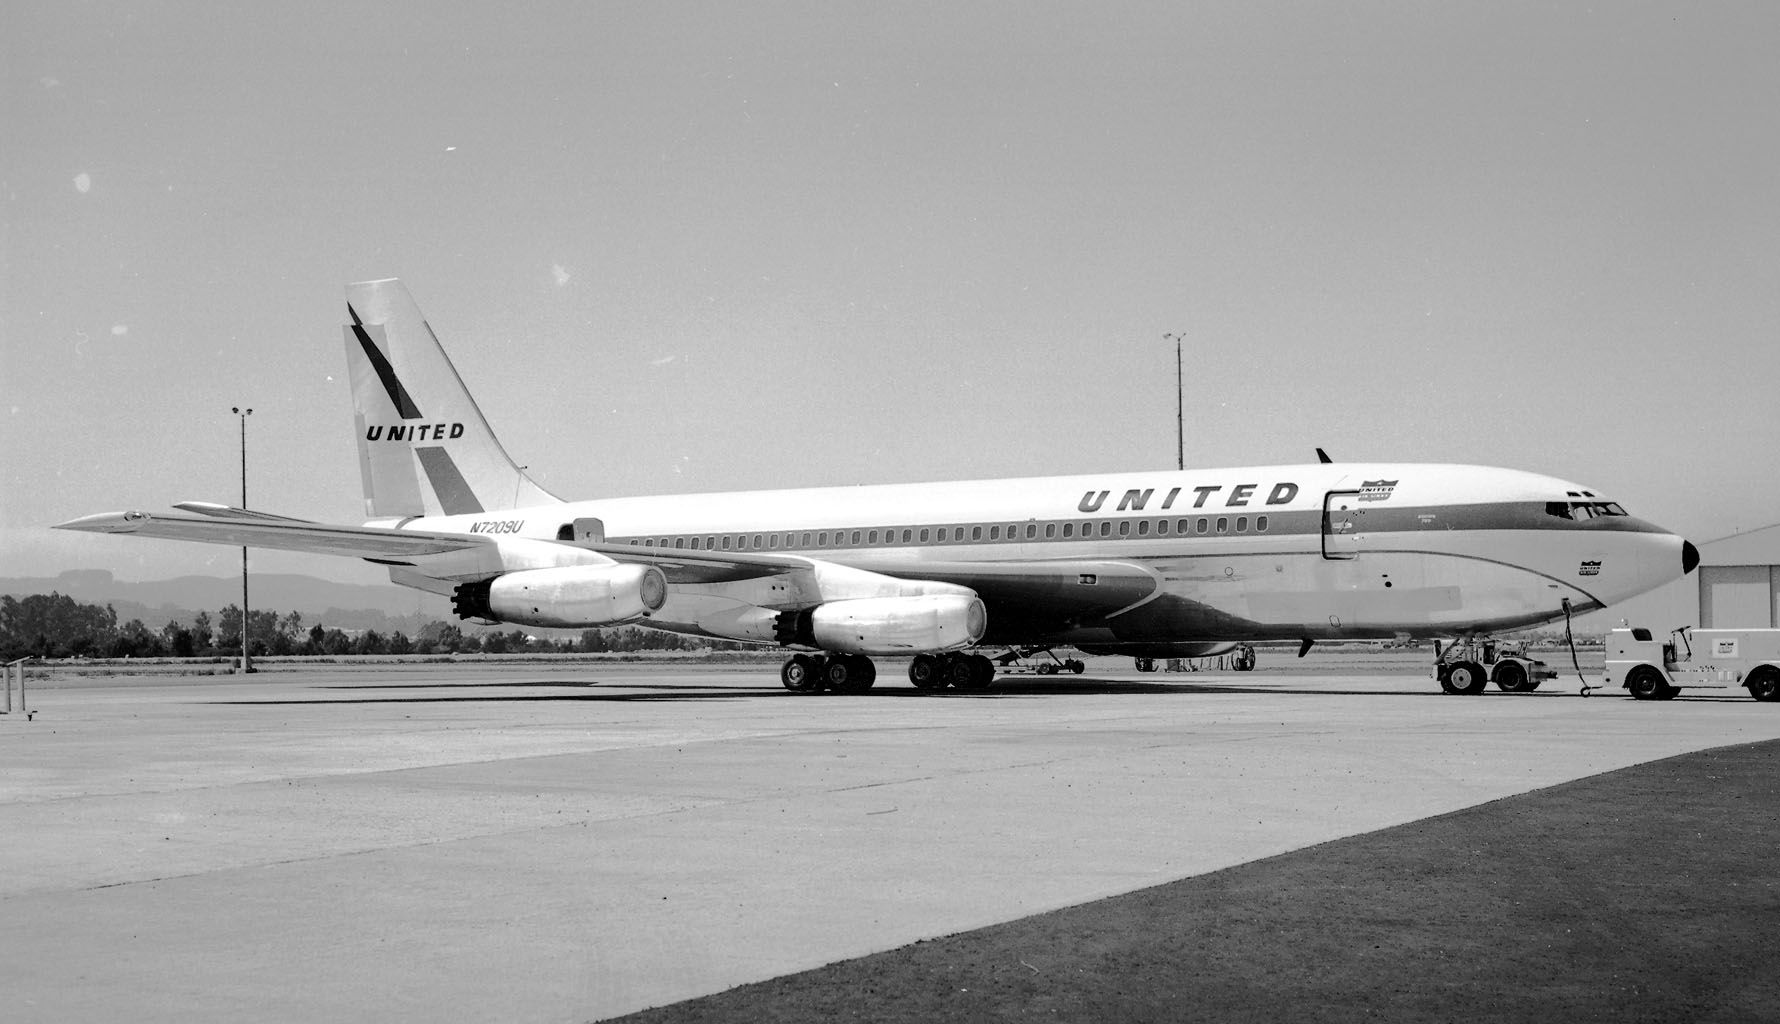 A United Airlines Boeing 720 parked at an airport.